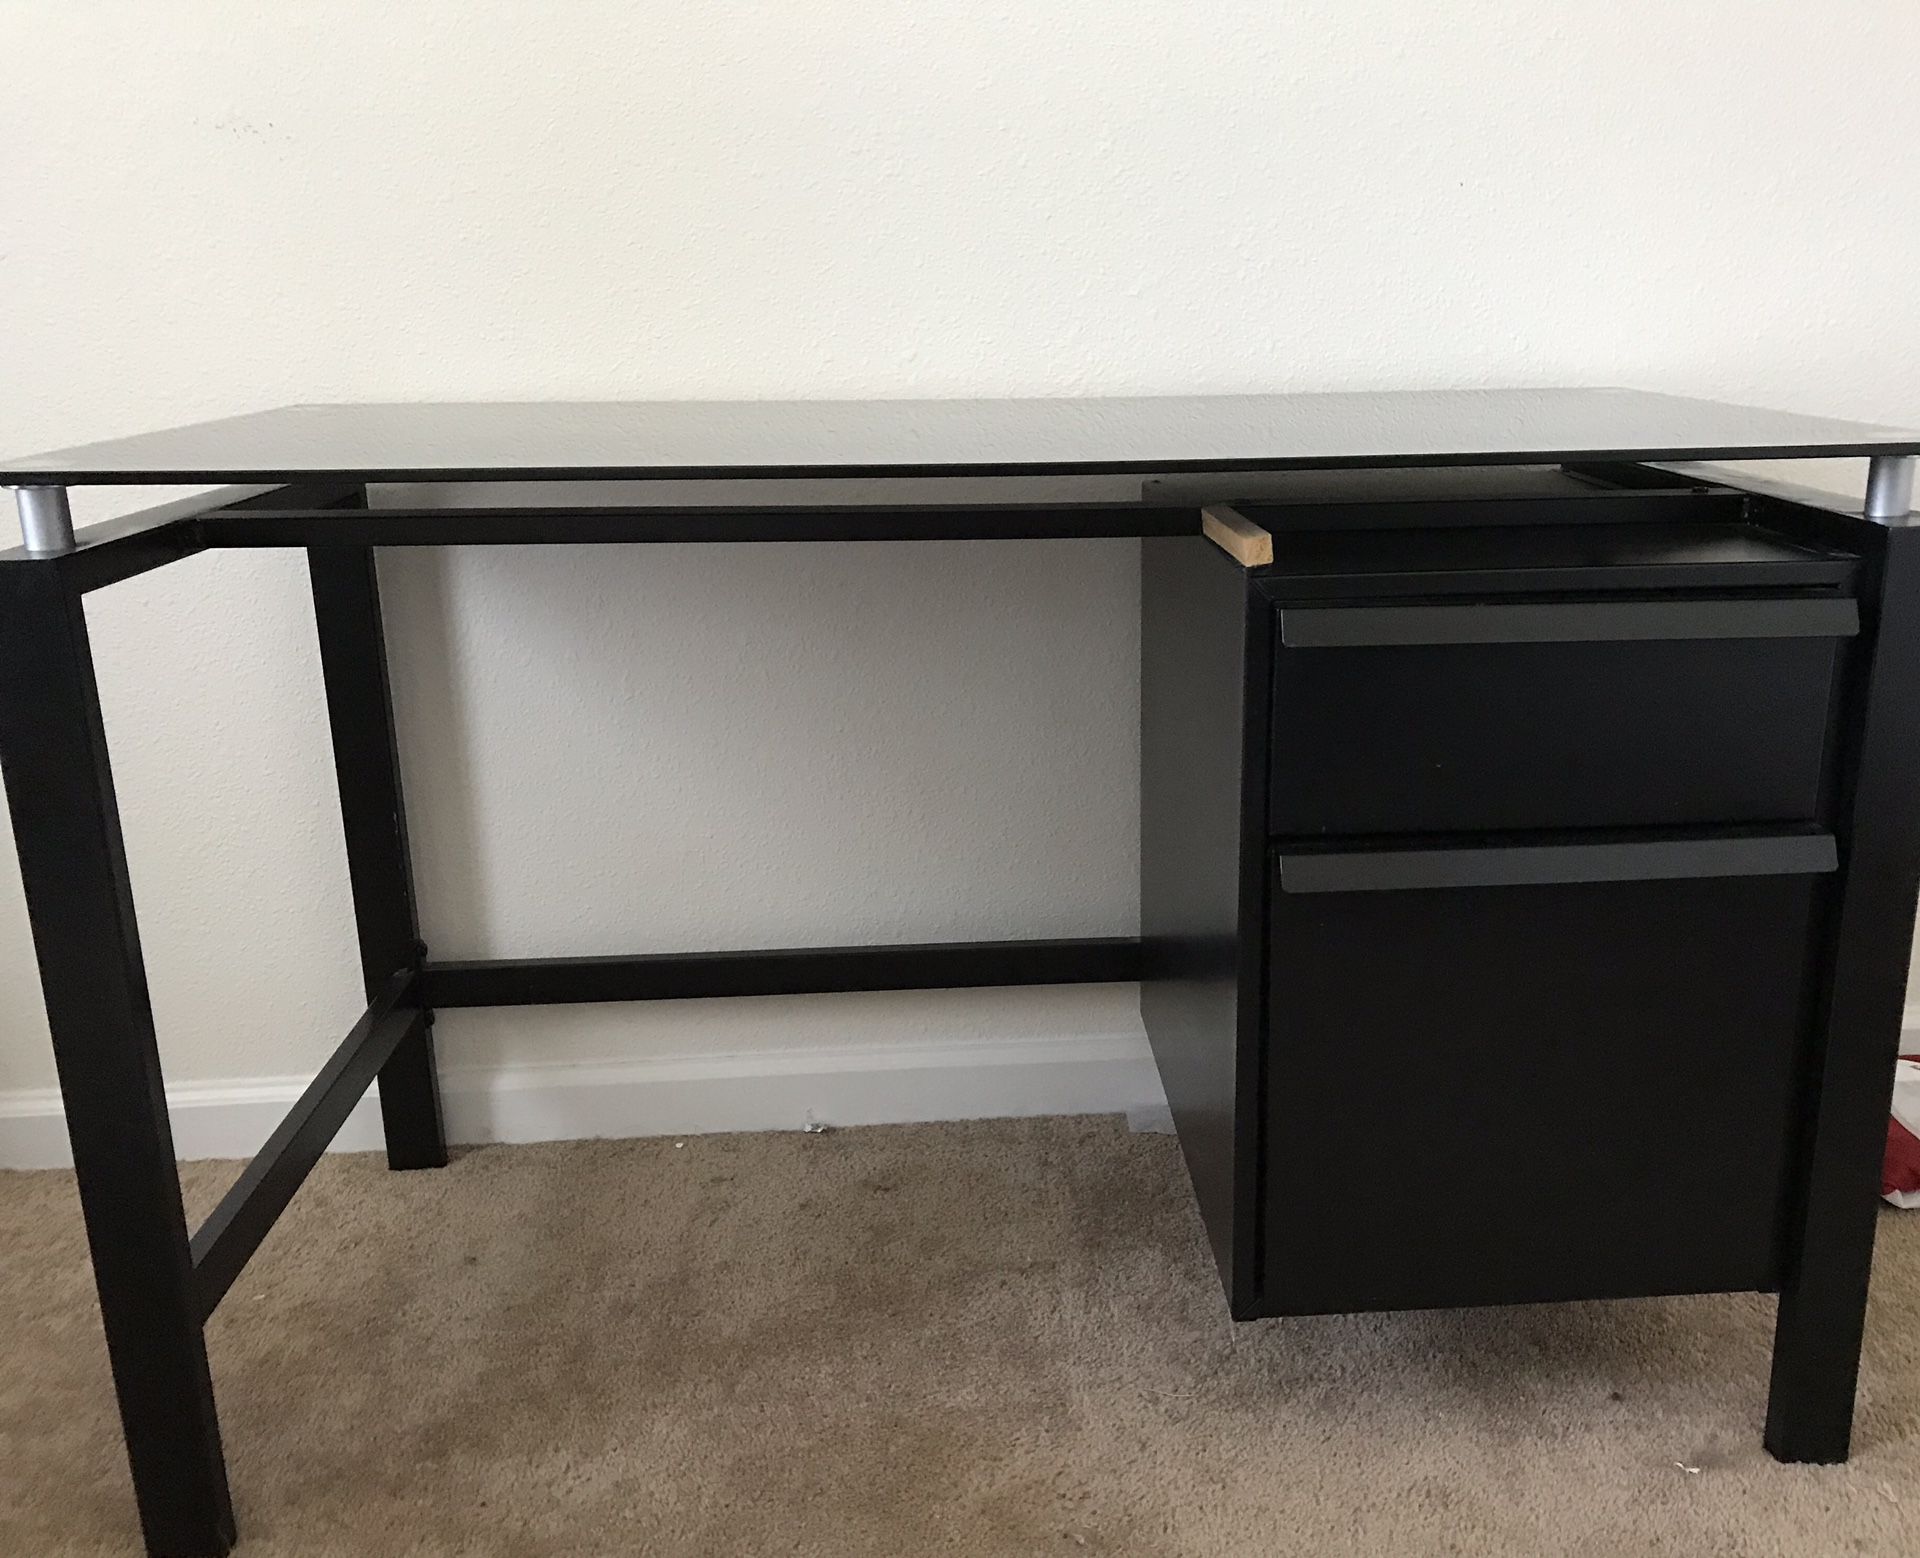 Desk with glass top and metal body